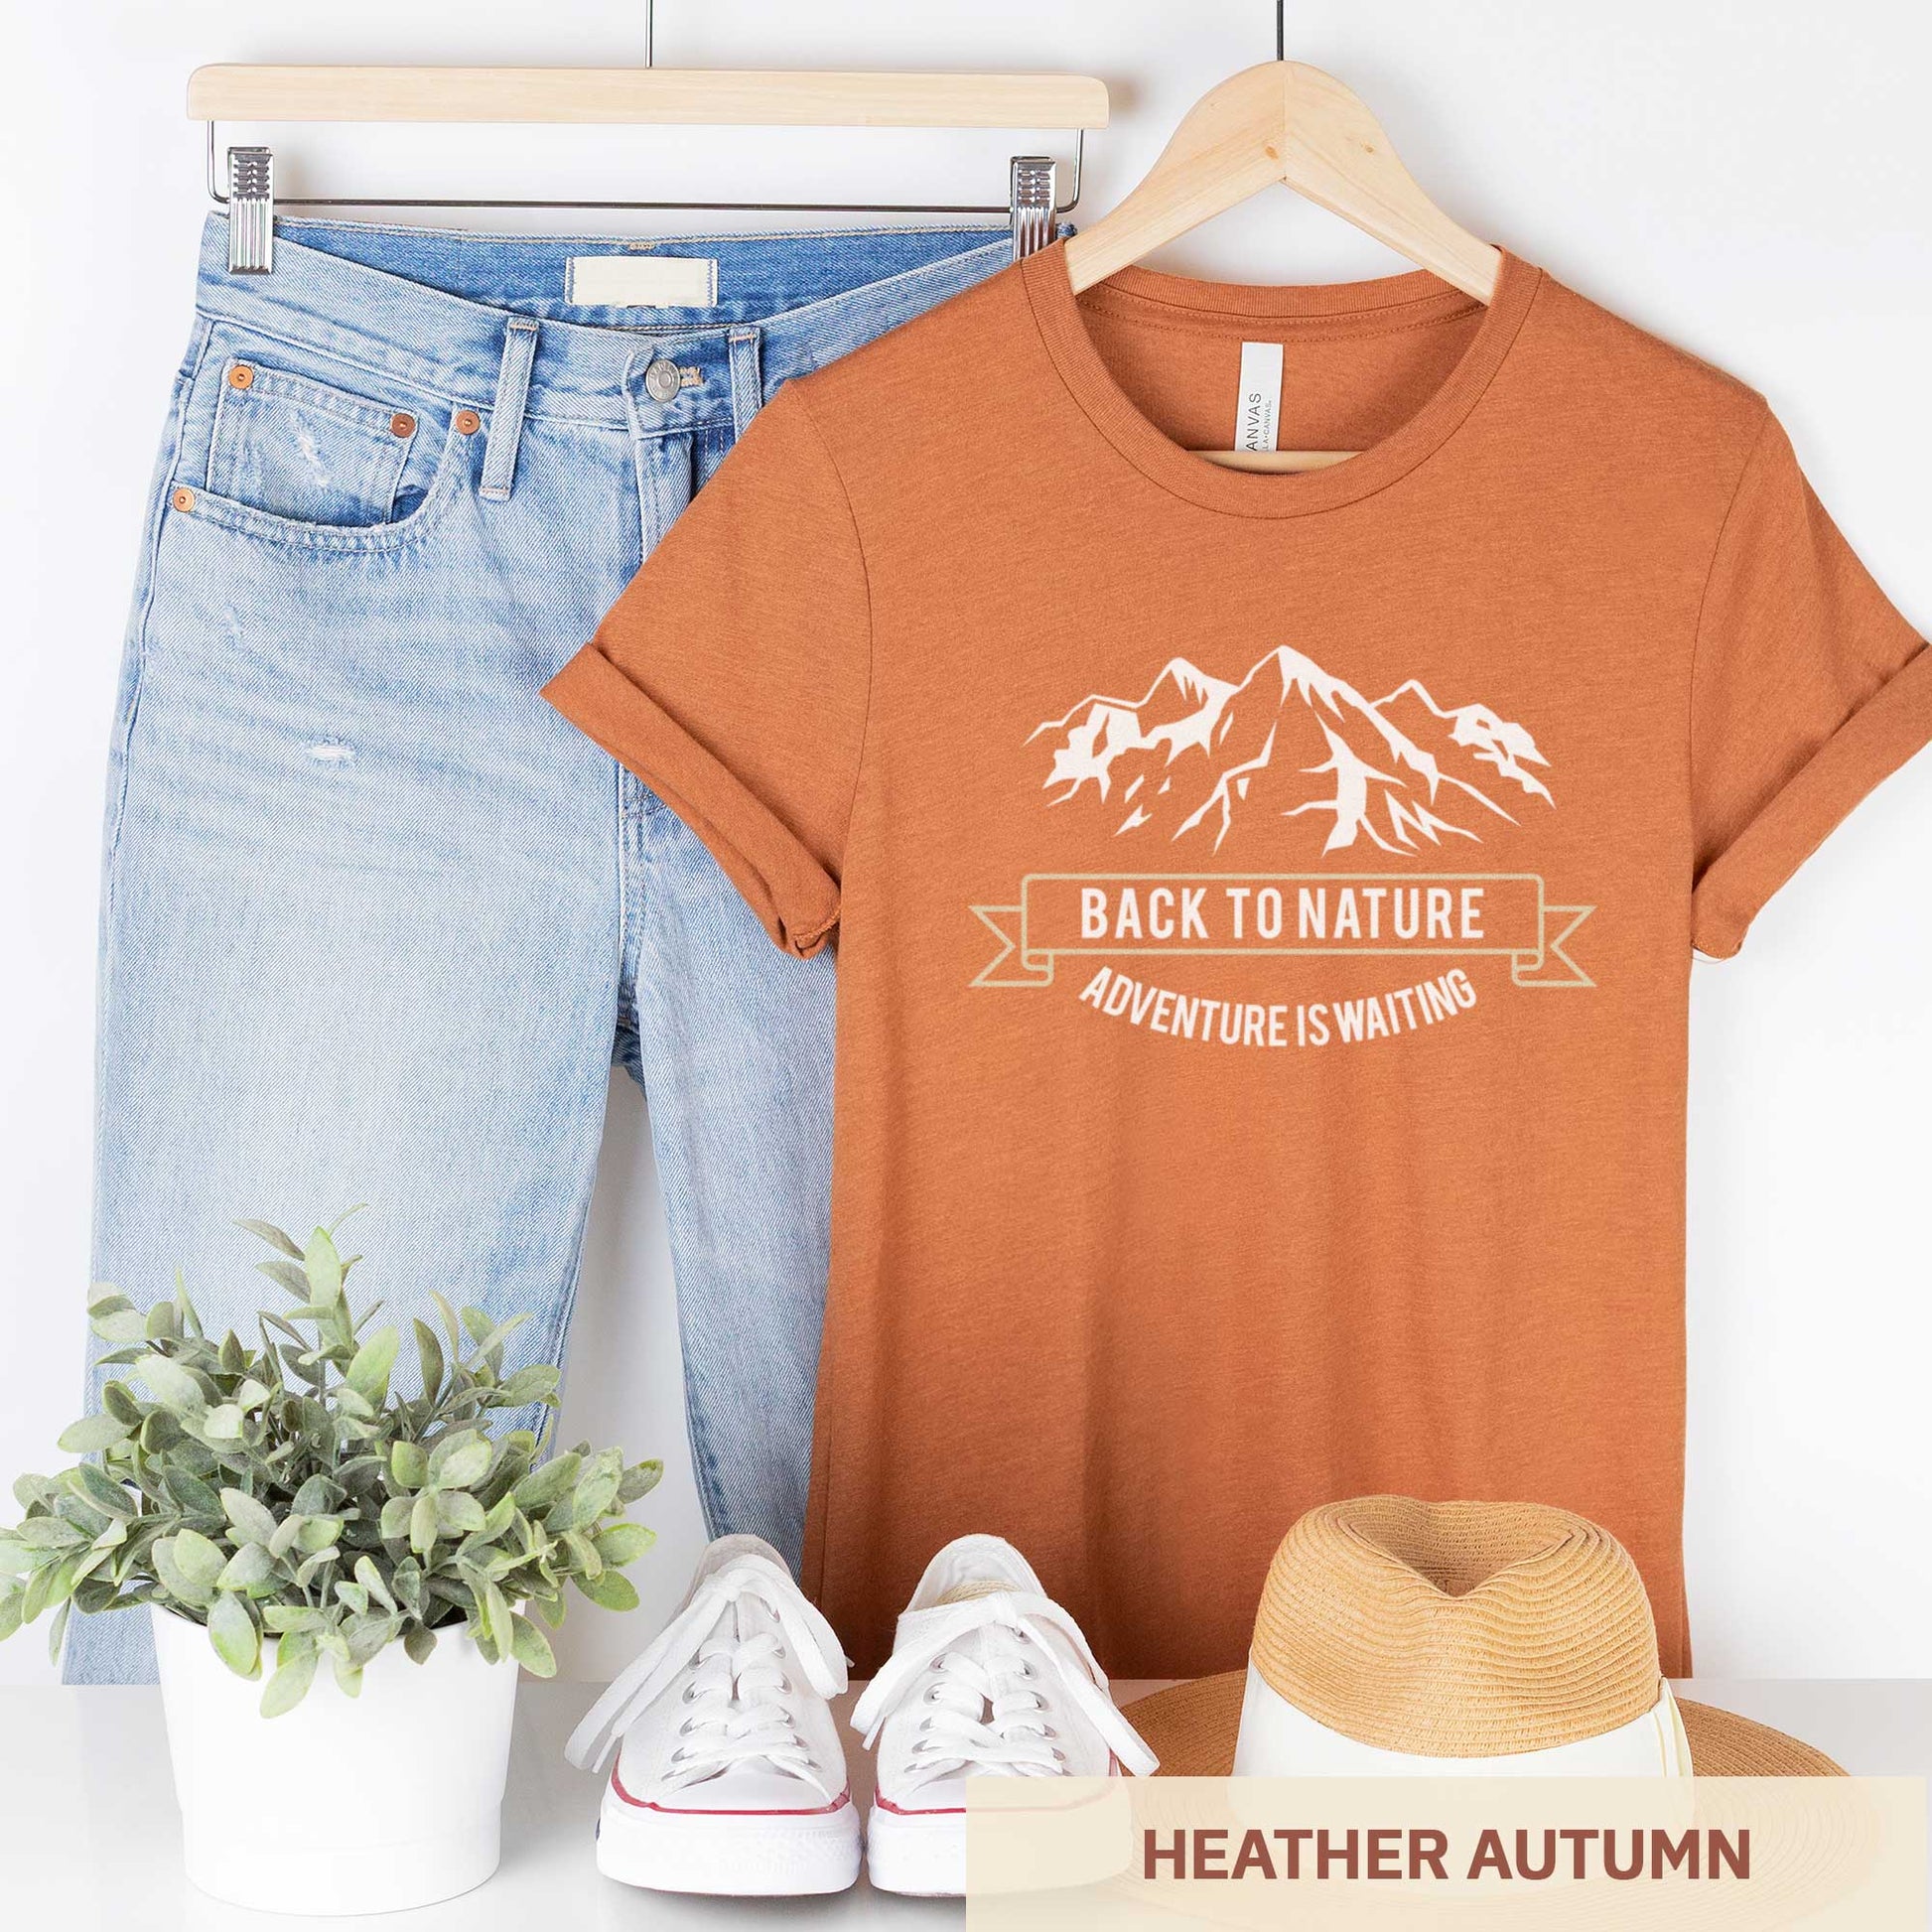 A hanging heather autumn Bella Canvas t-shirt that says back to nature with mountains.